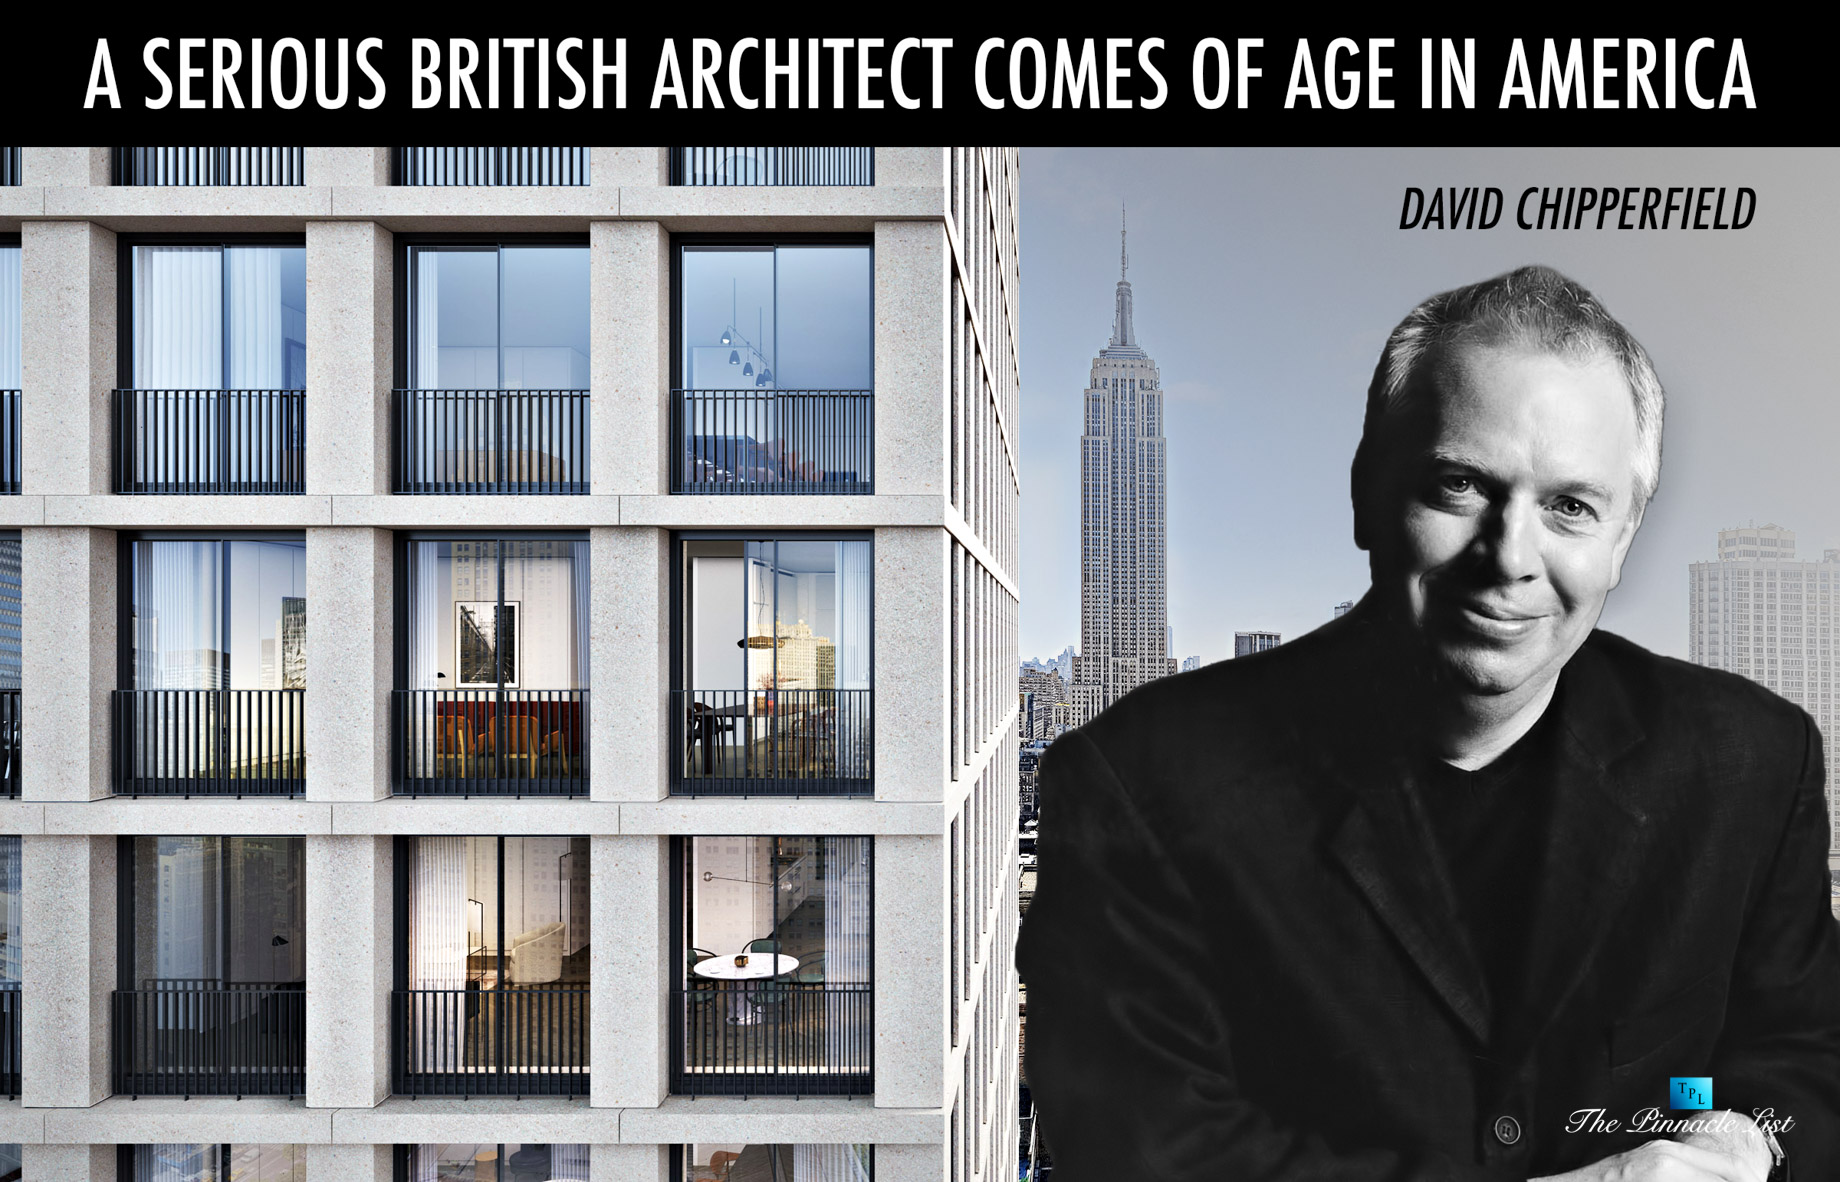 David Chipperfield – A Serious British Architect Comes of Age in America